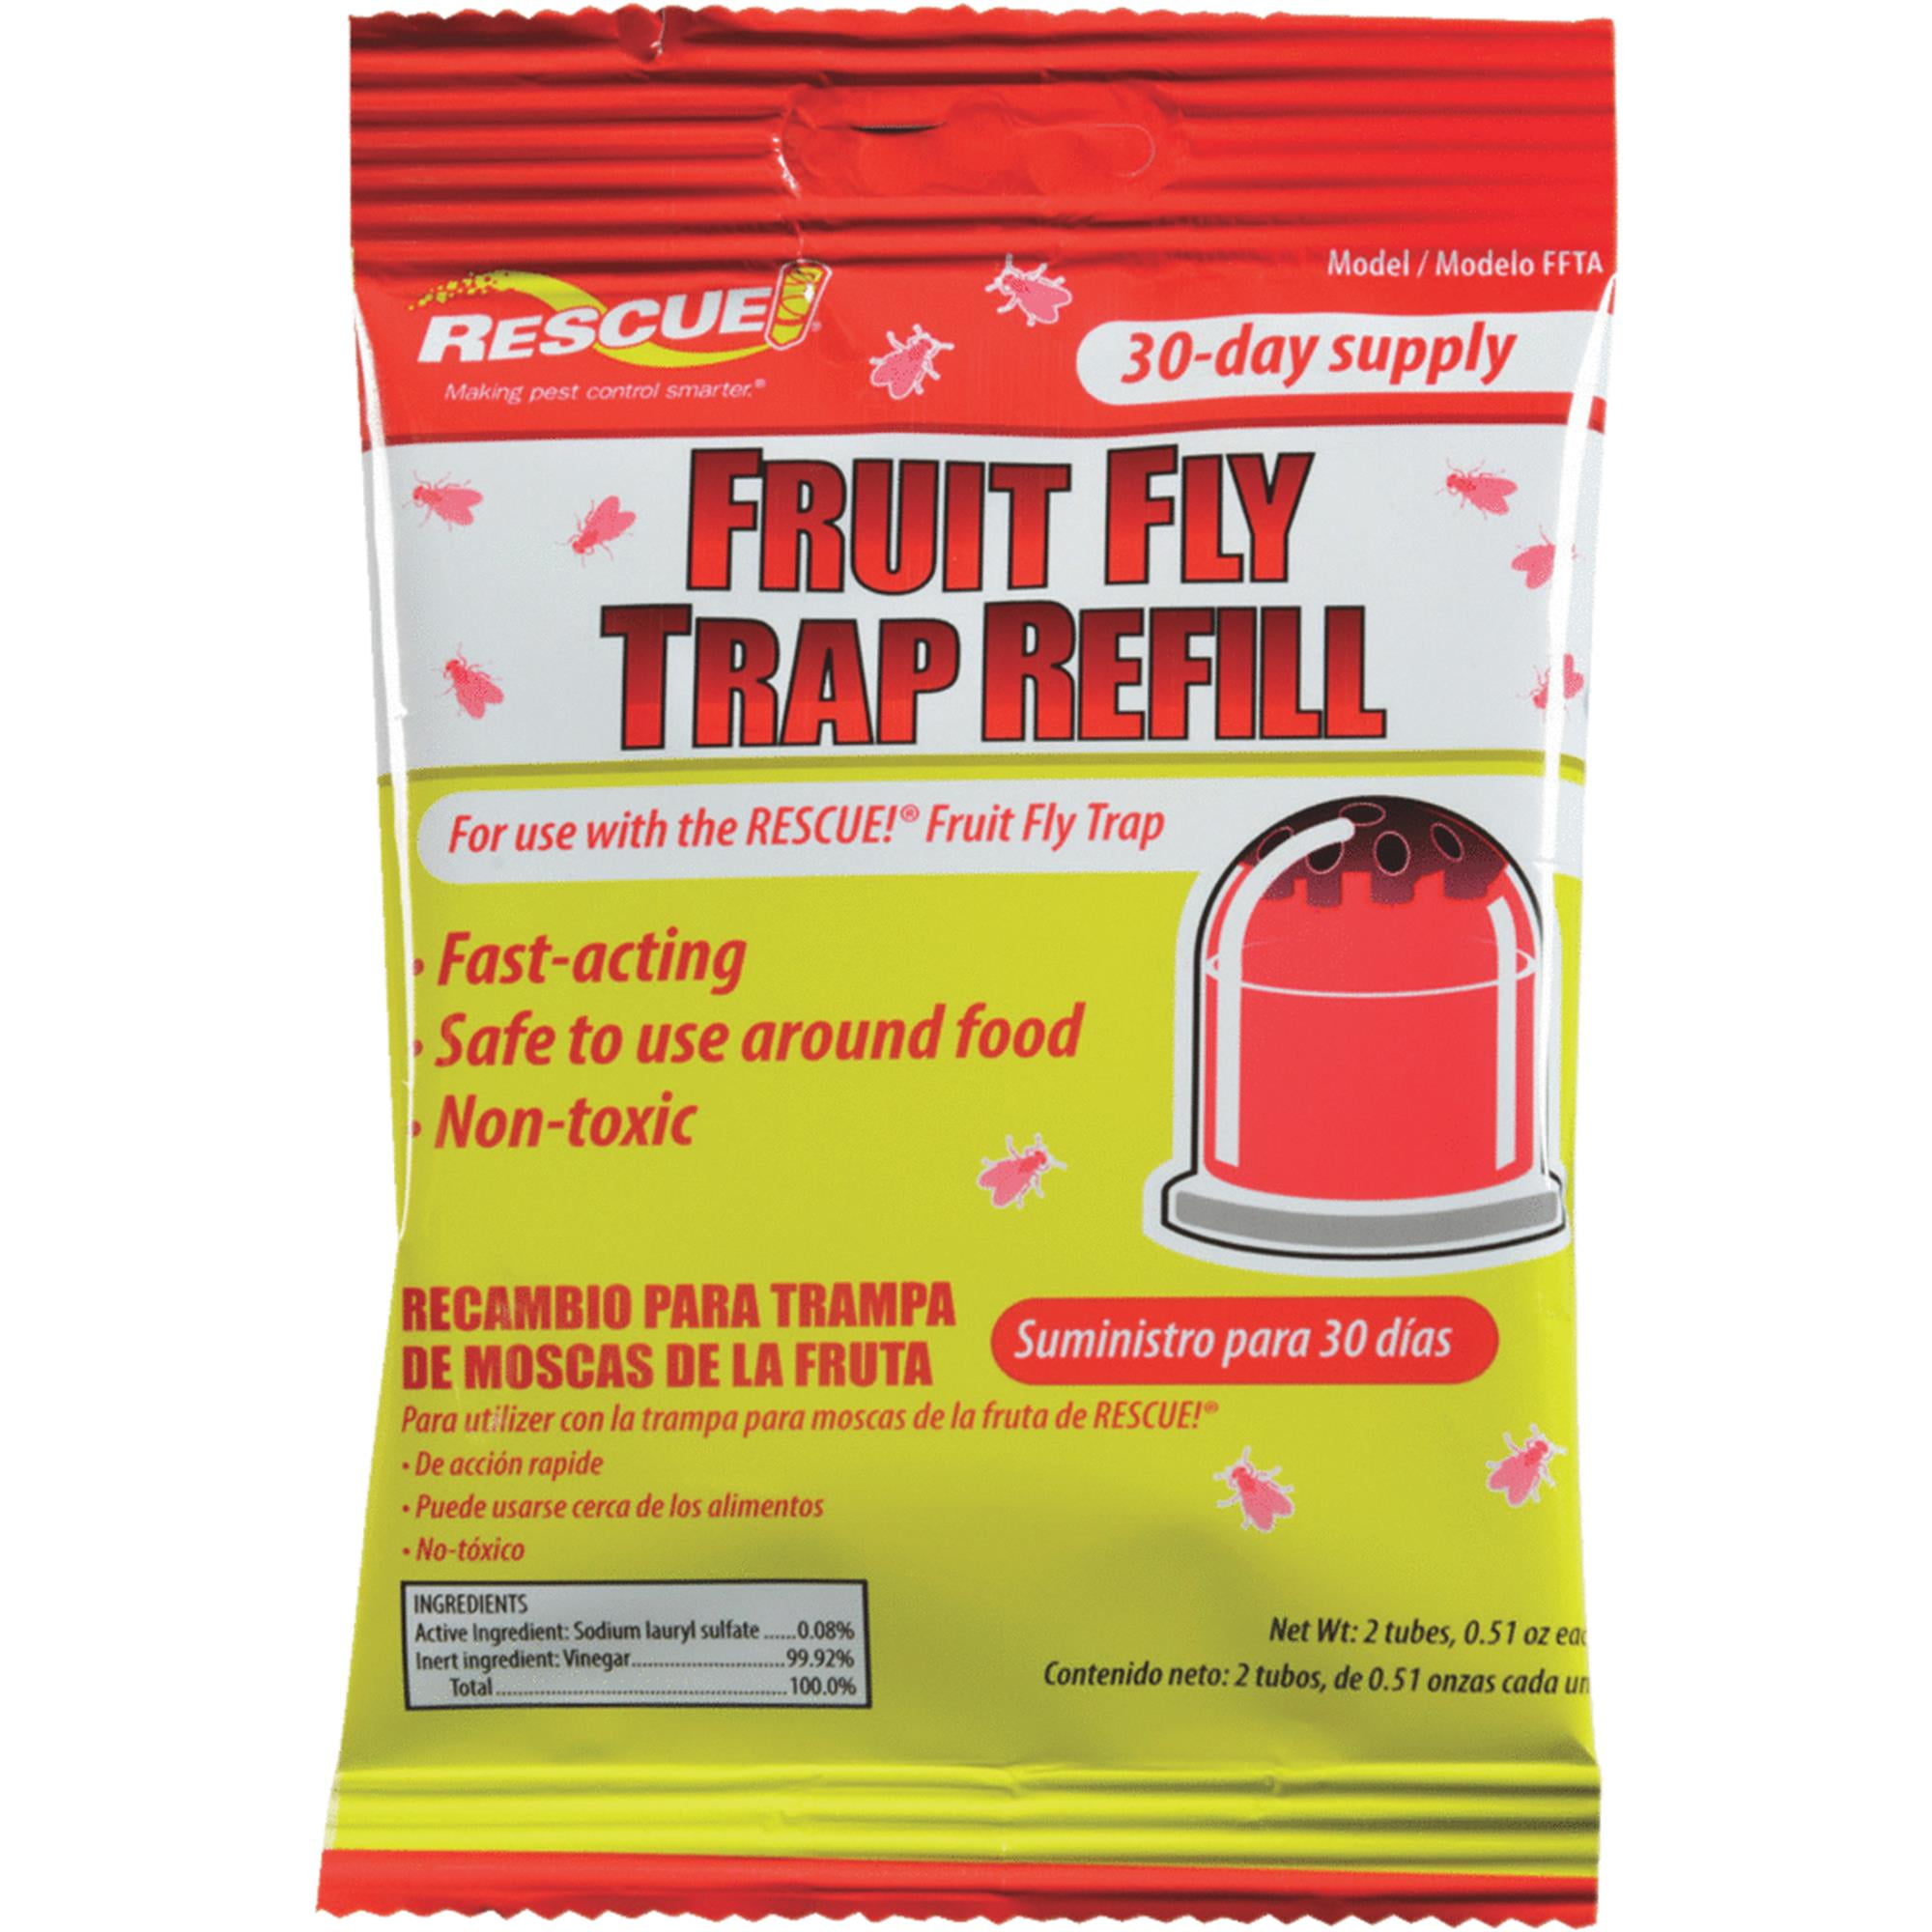  Protecker Fruit Fly Trap Refill Liquid Only,2023 Fruit Fly  Traps for Indoors,Fruit Fly Killer for Home,Kitchen,Ready-to-Use Fly Trap  Refill Liquid,Fruit Fly Trap Bait Refill for Indoors(4 Pack) : Patio, Lawn